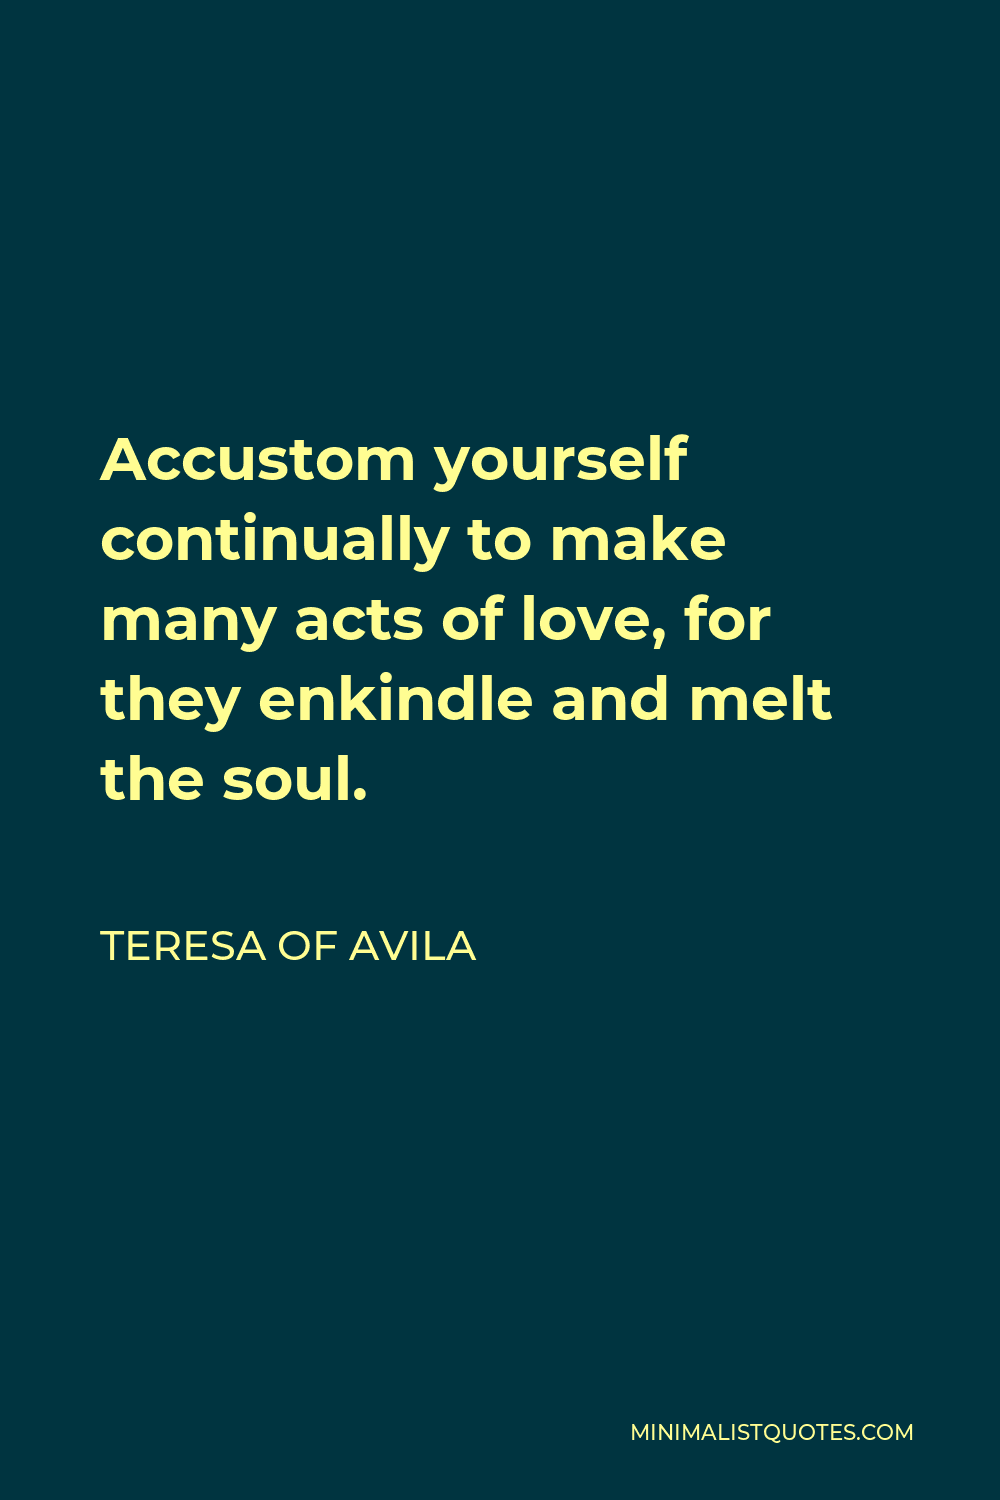 Teresa of Avila Quote - Accustom yourself continually to make many acts of love, for they enkindle and melt the soul.